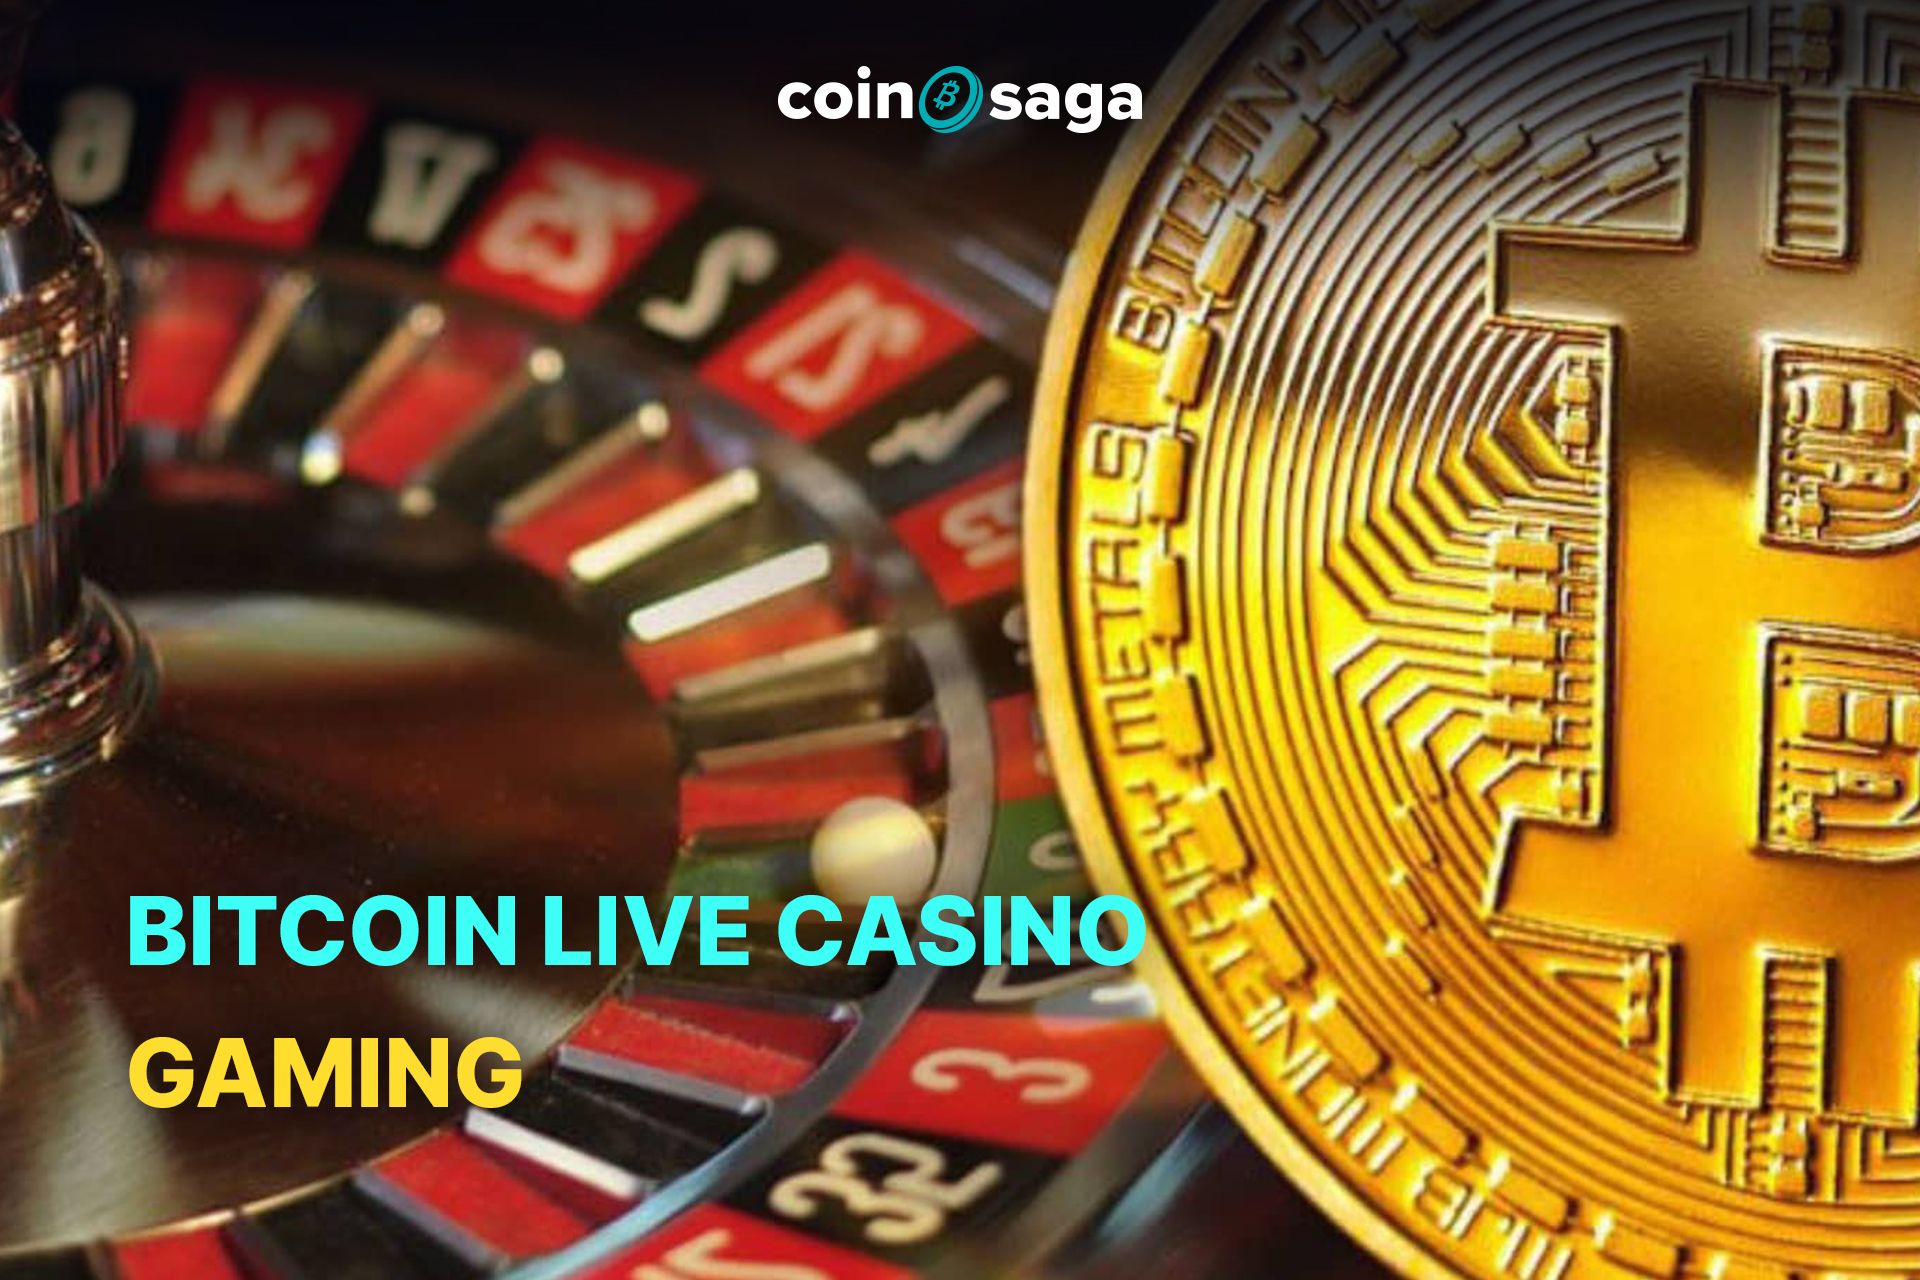 crypto casinos - How To Be More Productive?